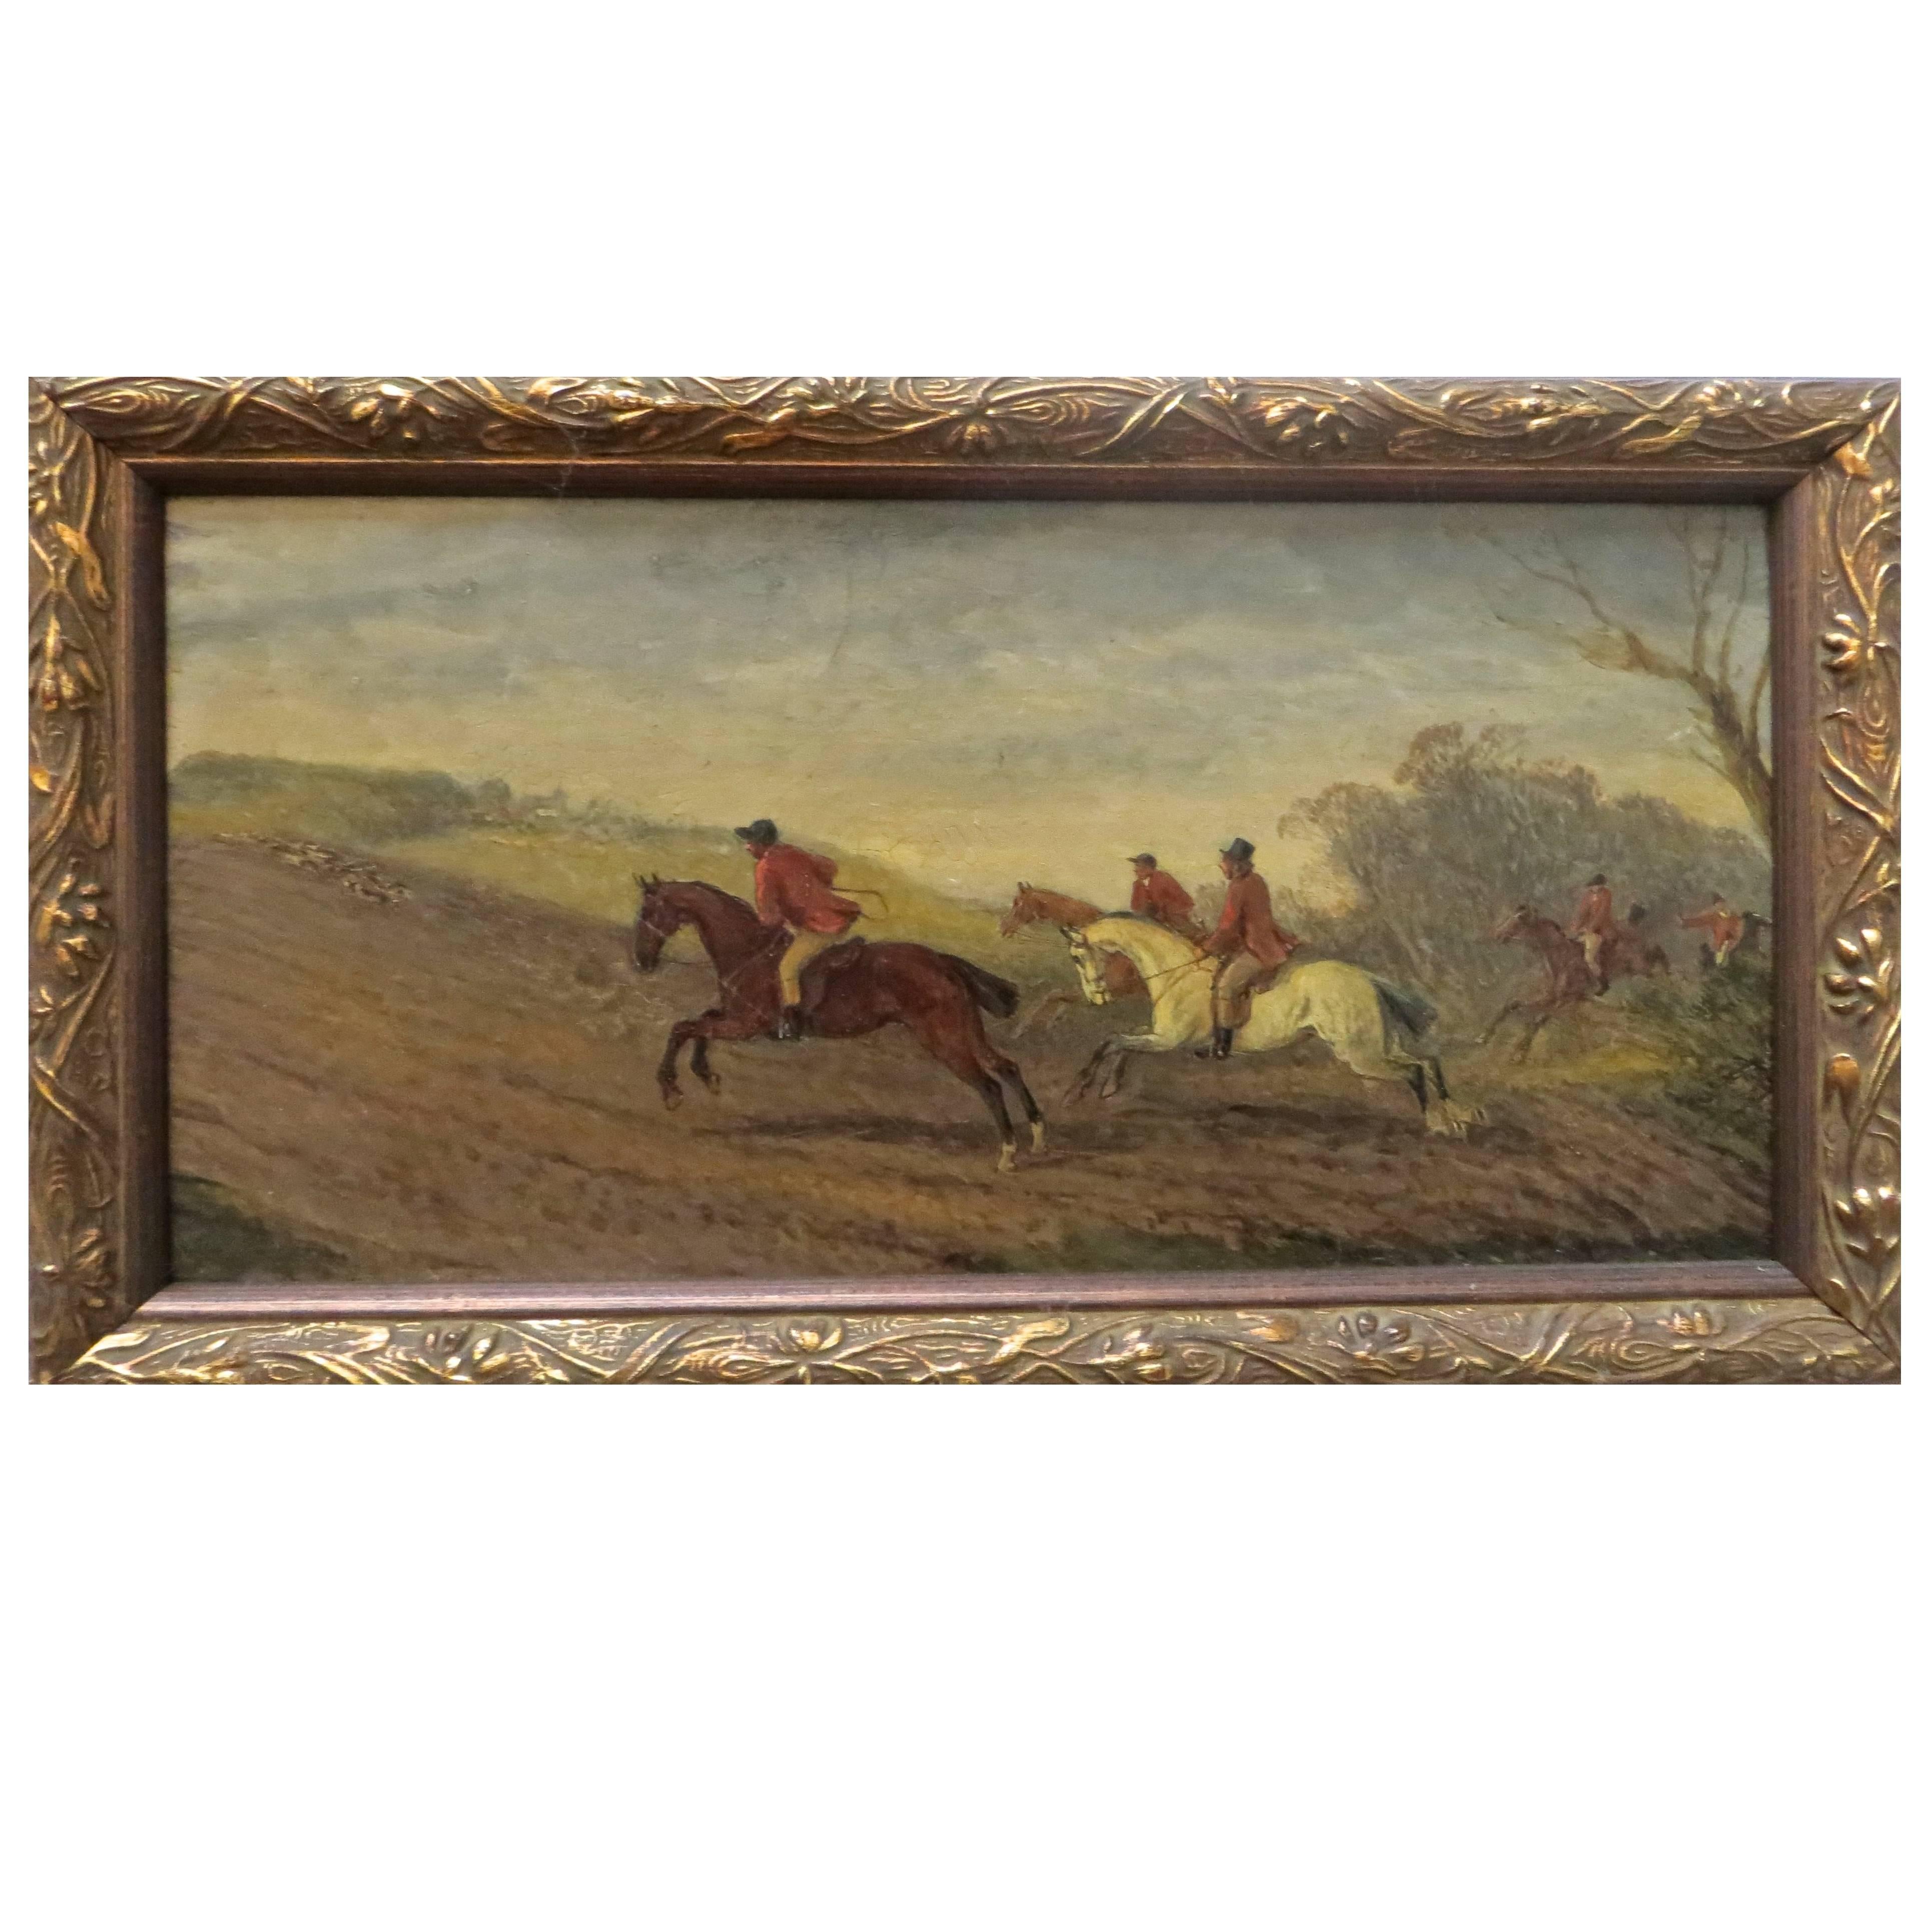 Early 19th Century English Hunting Scene Oil on Board